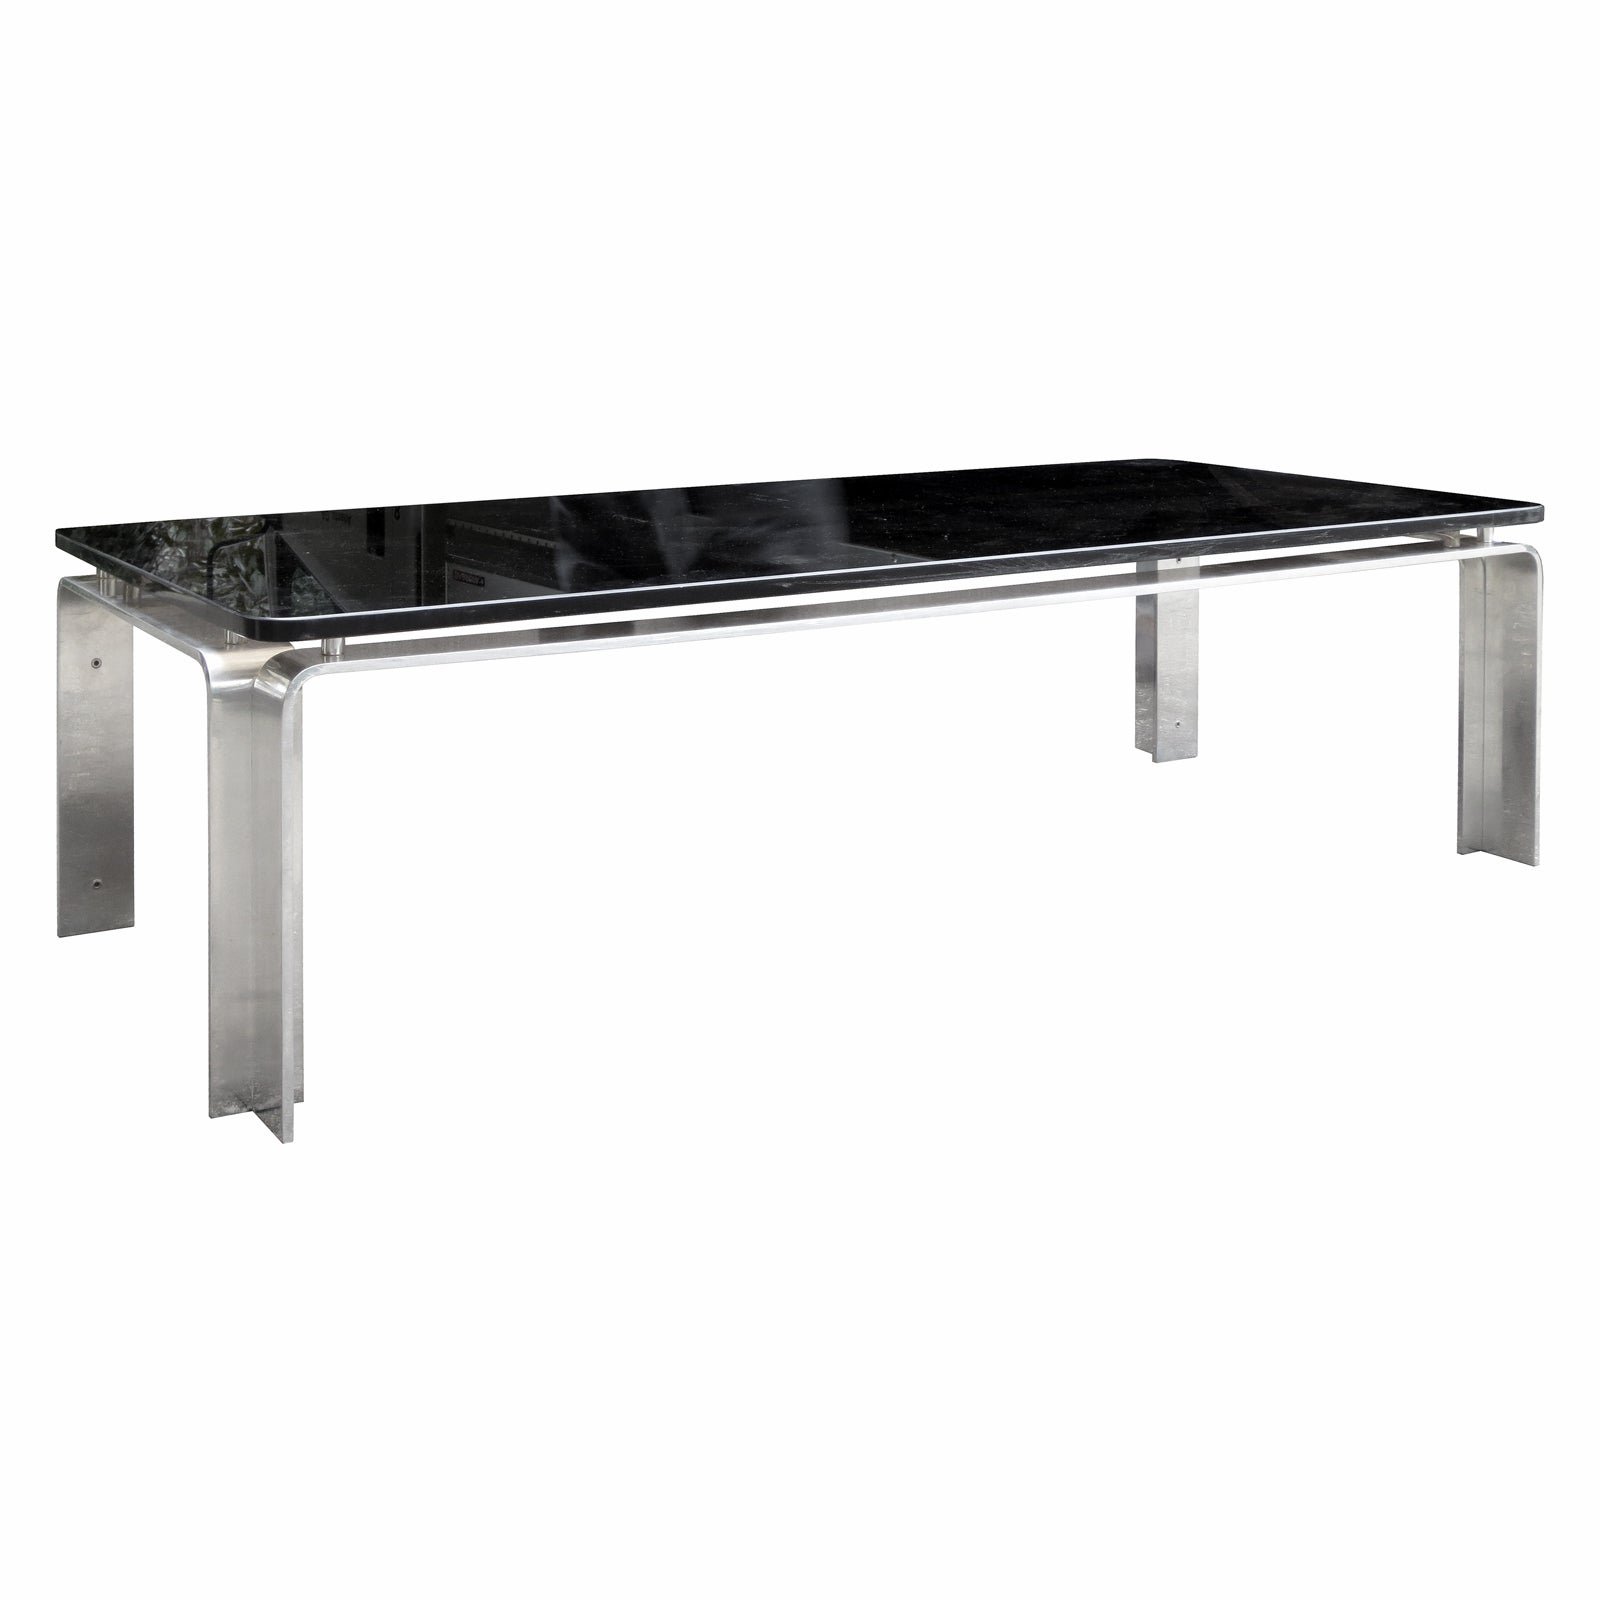 Mid-20th Century Aluminum Coffee Table, in the Style of Willy Rizzo